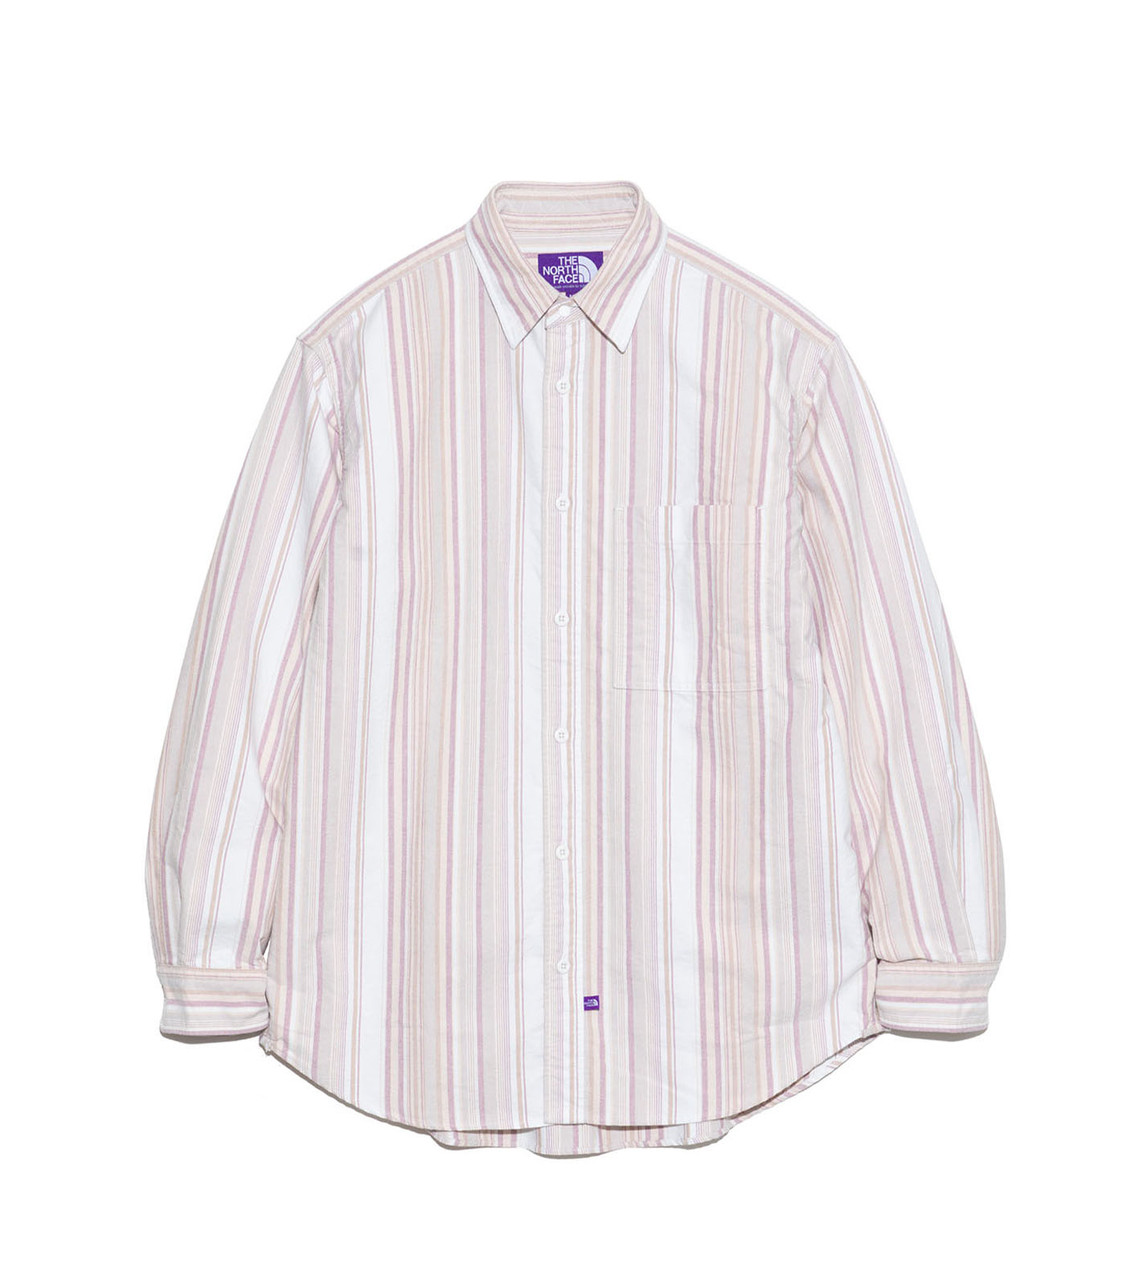 THE NORTH FACE PURPLE LABEL Regular Collar NP Striped Field Shirt NT3409N  7093